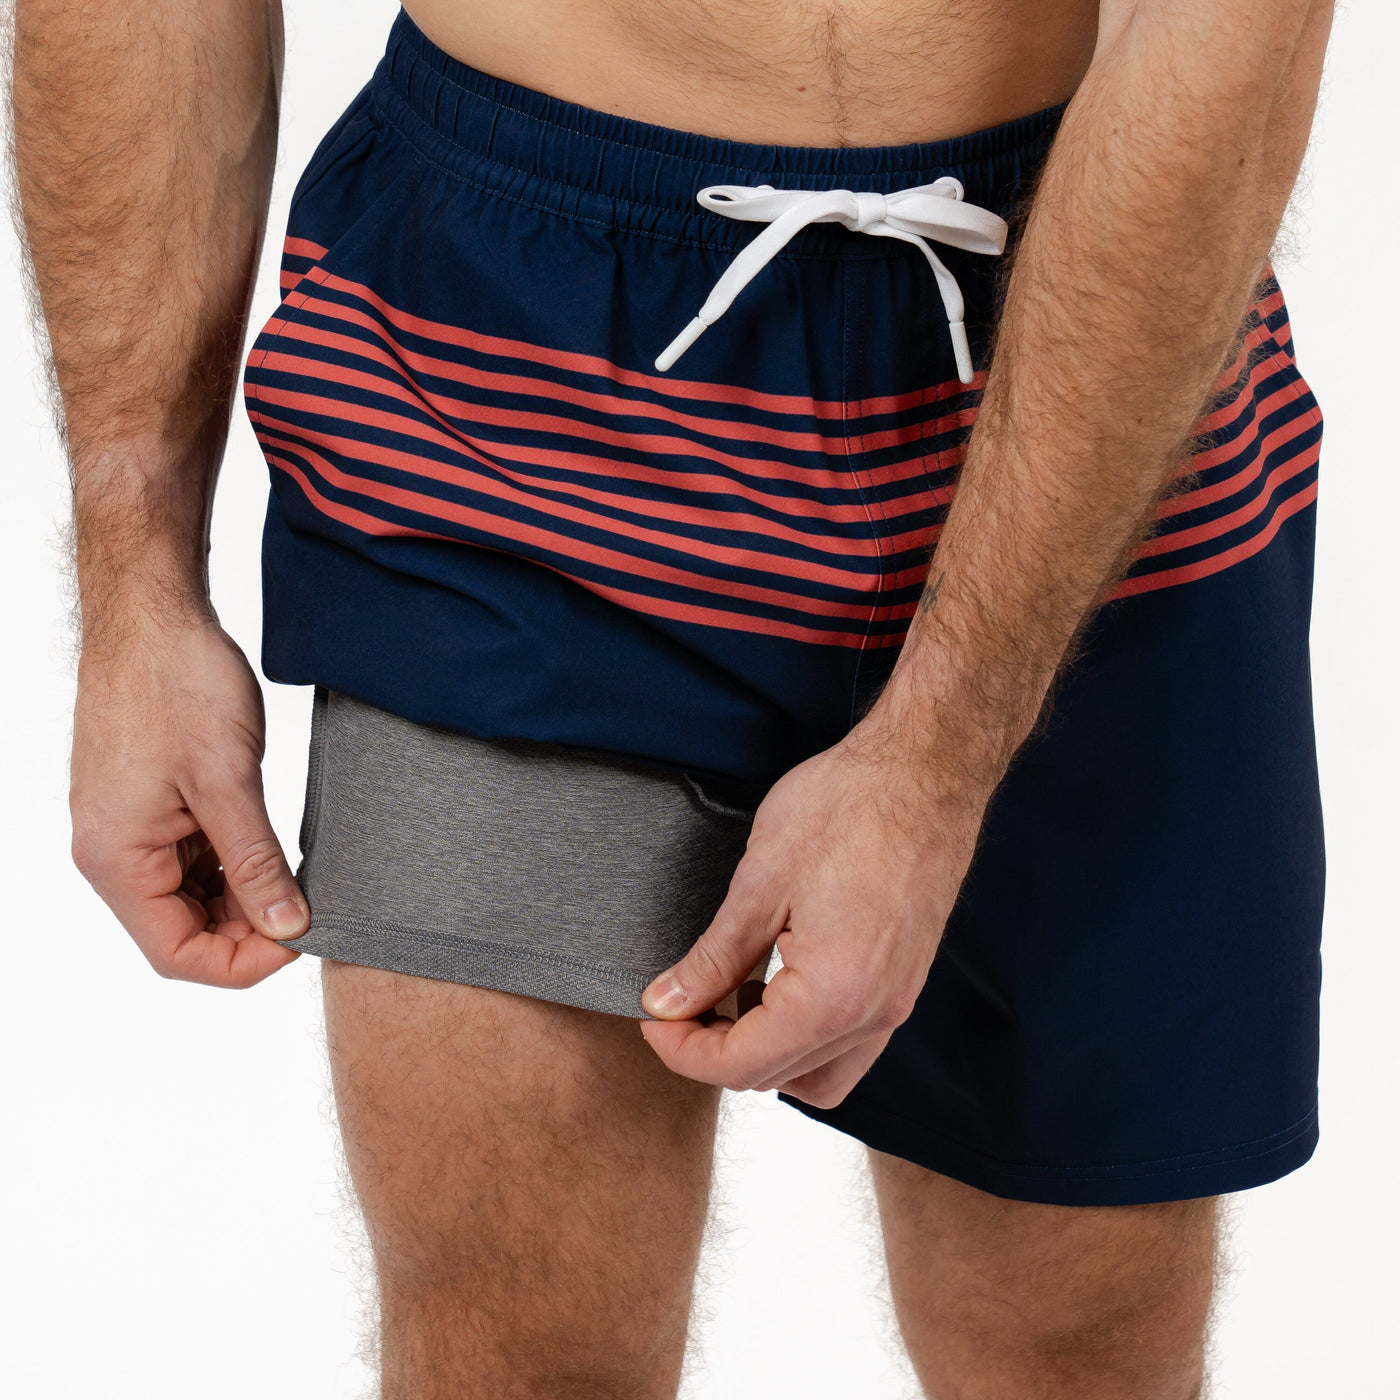 Medley Swim Trunk | The Wave Runners - Admiral Navy/Sorbet Red